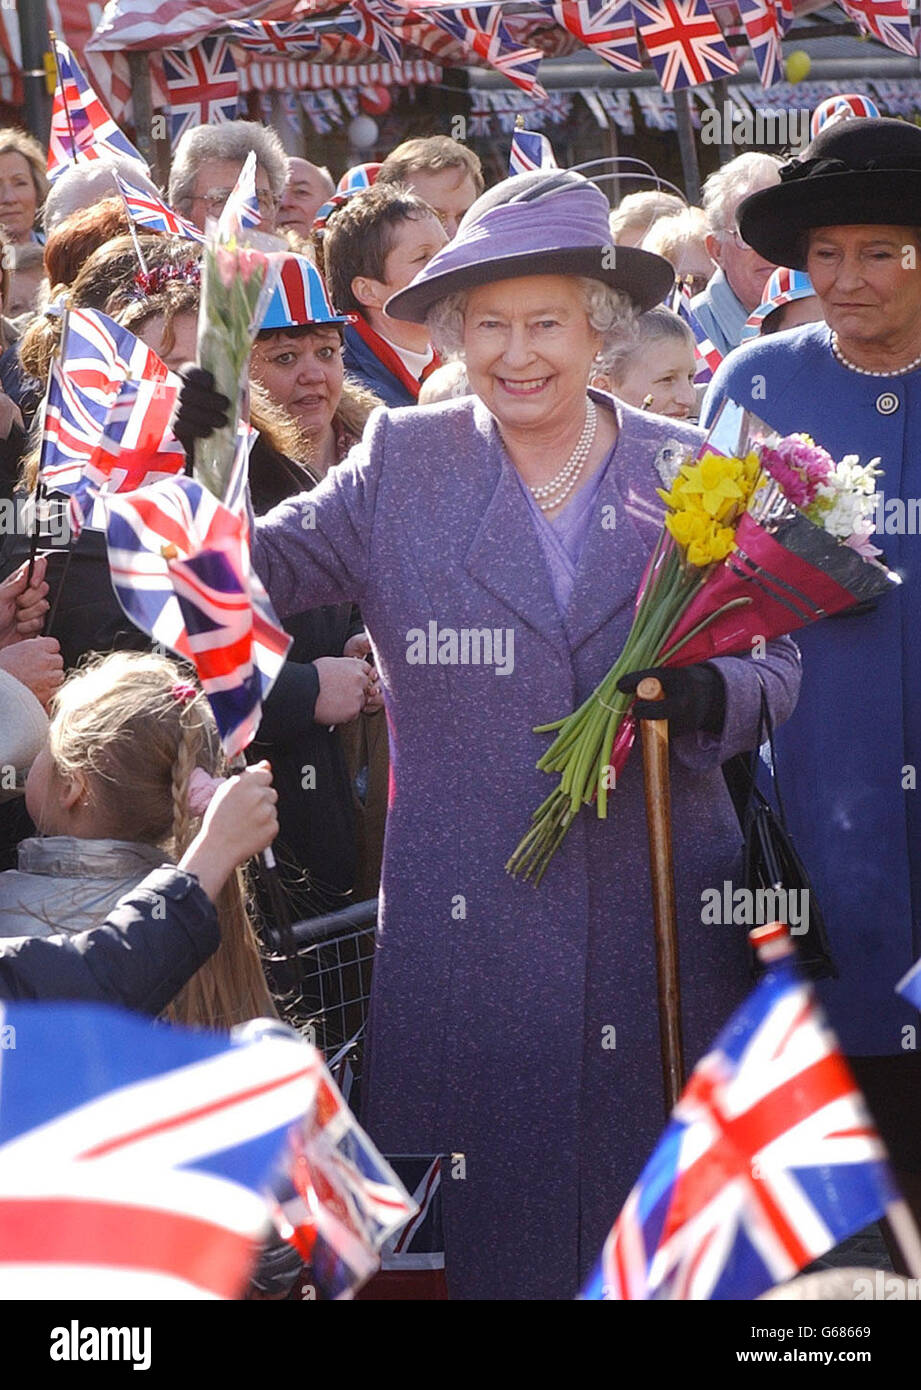 The Queen meets well wishers during a walkabout in the market square, Romford. The Queen, who has travelled the globe visiting some of the world's most famous destinations, has never before visited the area, famous for Cockney rhyming slang and its East End connections. Stock Photo